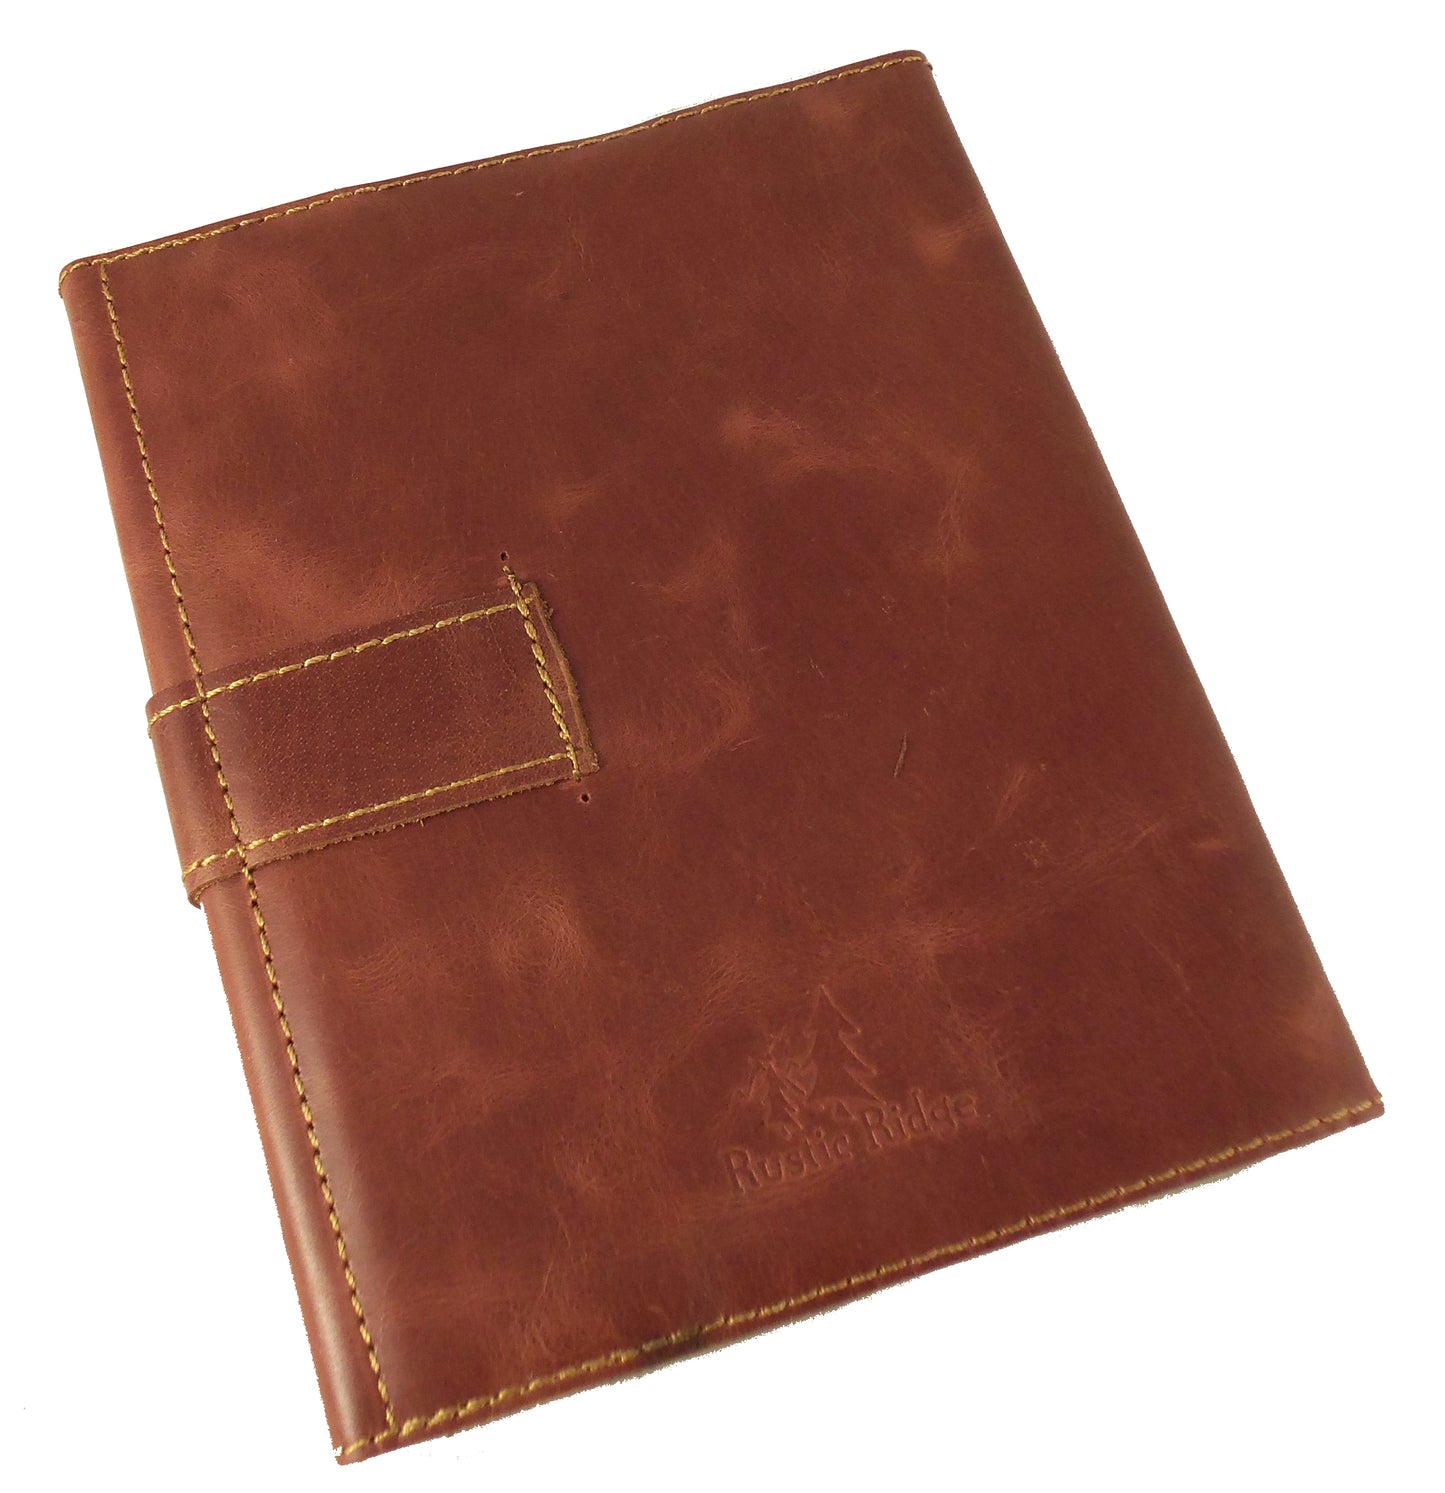 Refillable Leather Travel Journal with Handmade Paper - 200 pages - Soft Leather Lays Flat - 6x8" - - Rustic Ridge Leather